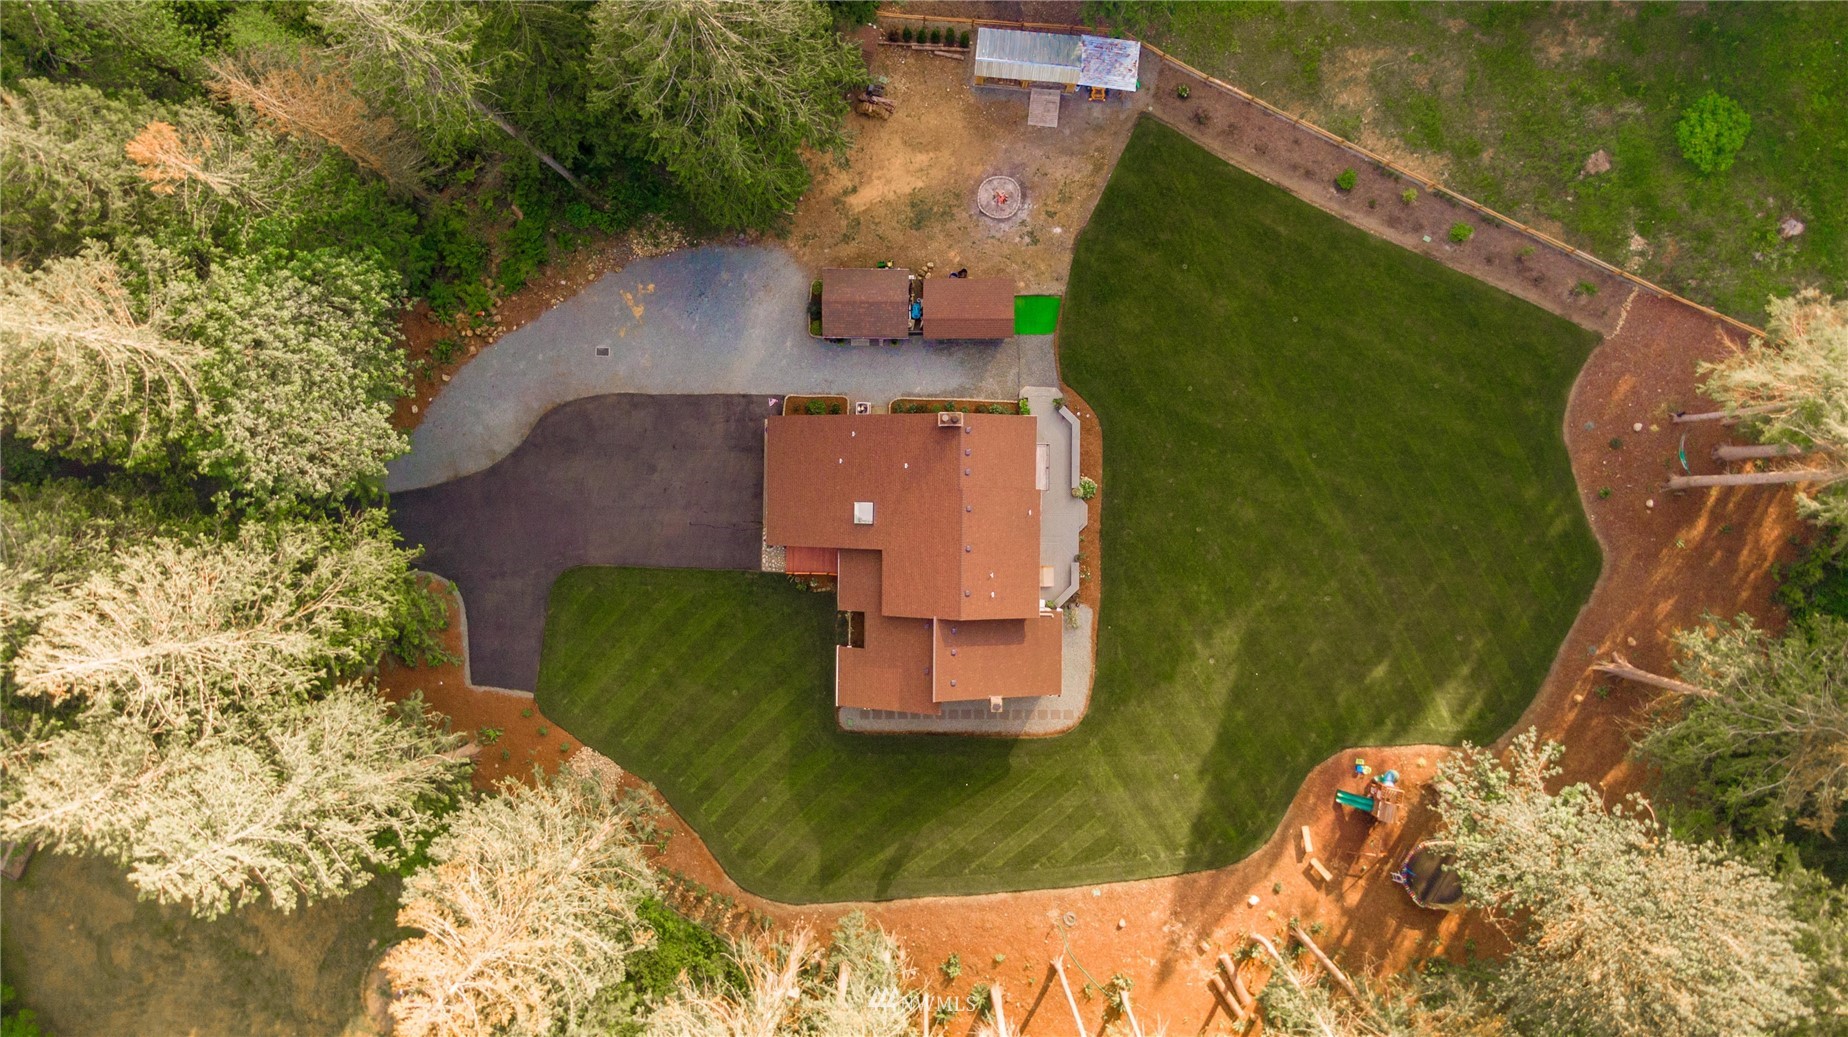 an aerial view of a house with a yard basket ball court and outdoor seating